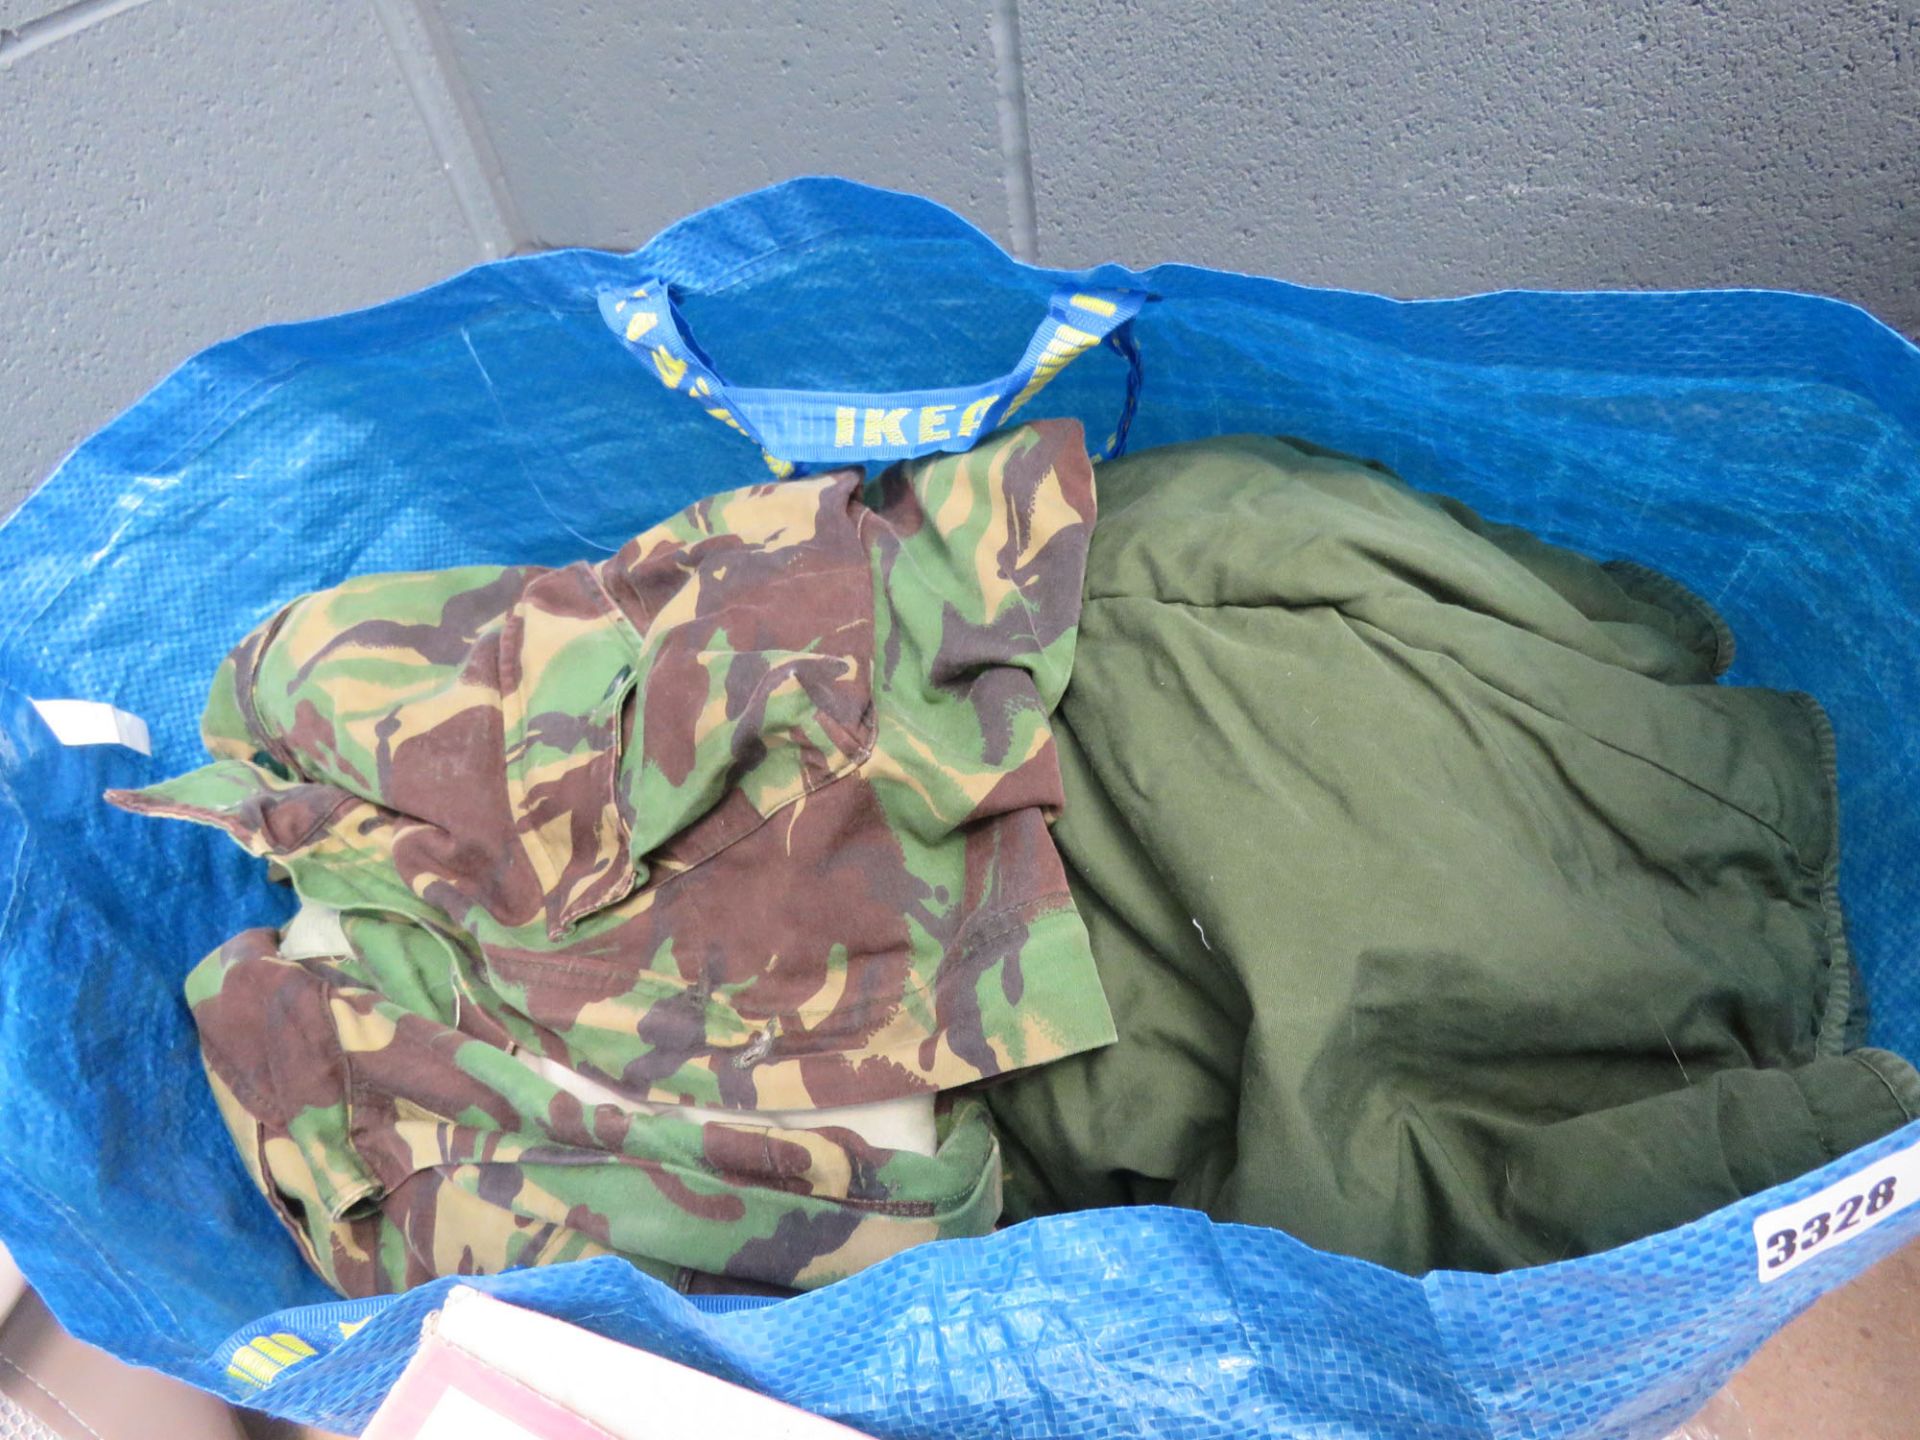 Large bag of military clothing